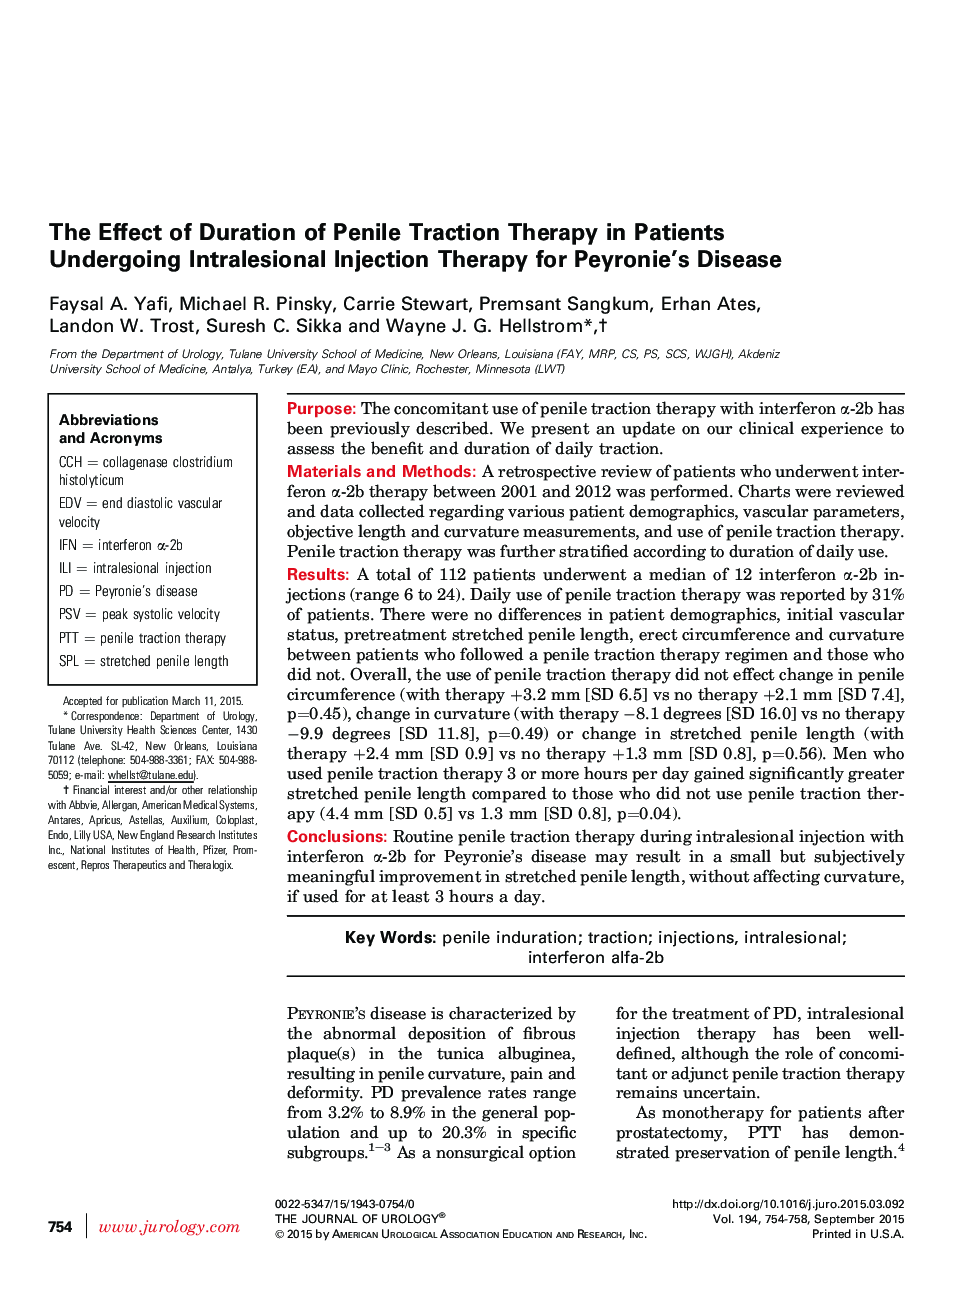 The Effect of Duration of Penile Traction Therapy in Patients Undergoing Intralesional Injection Therapy for Peyronie's Disease